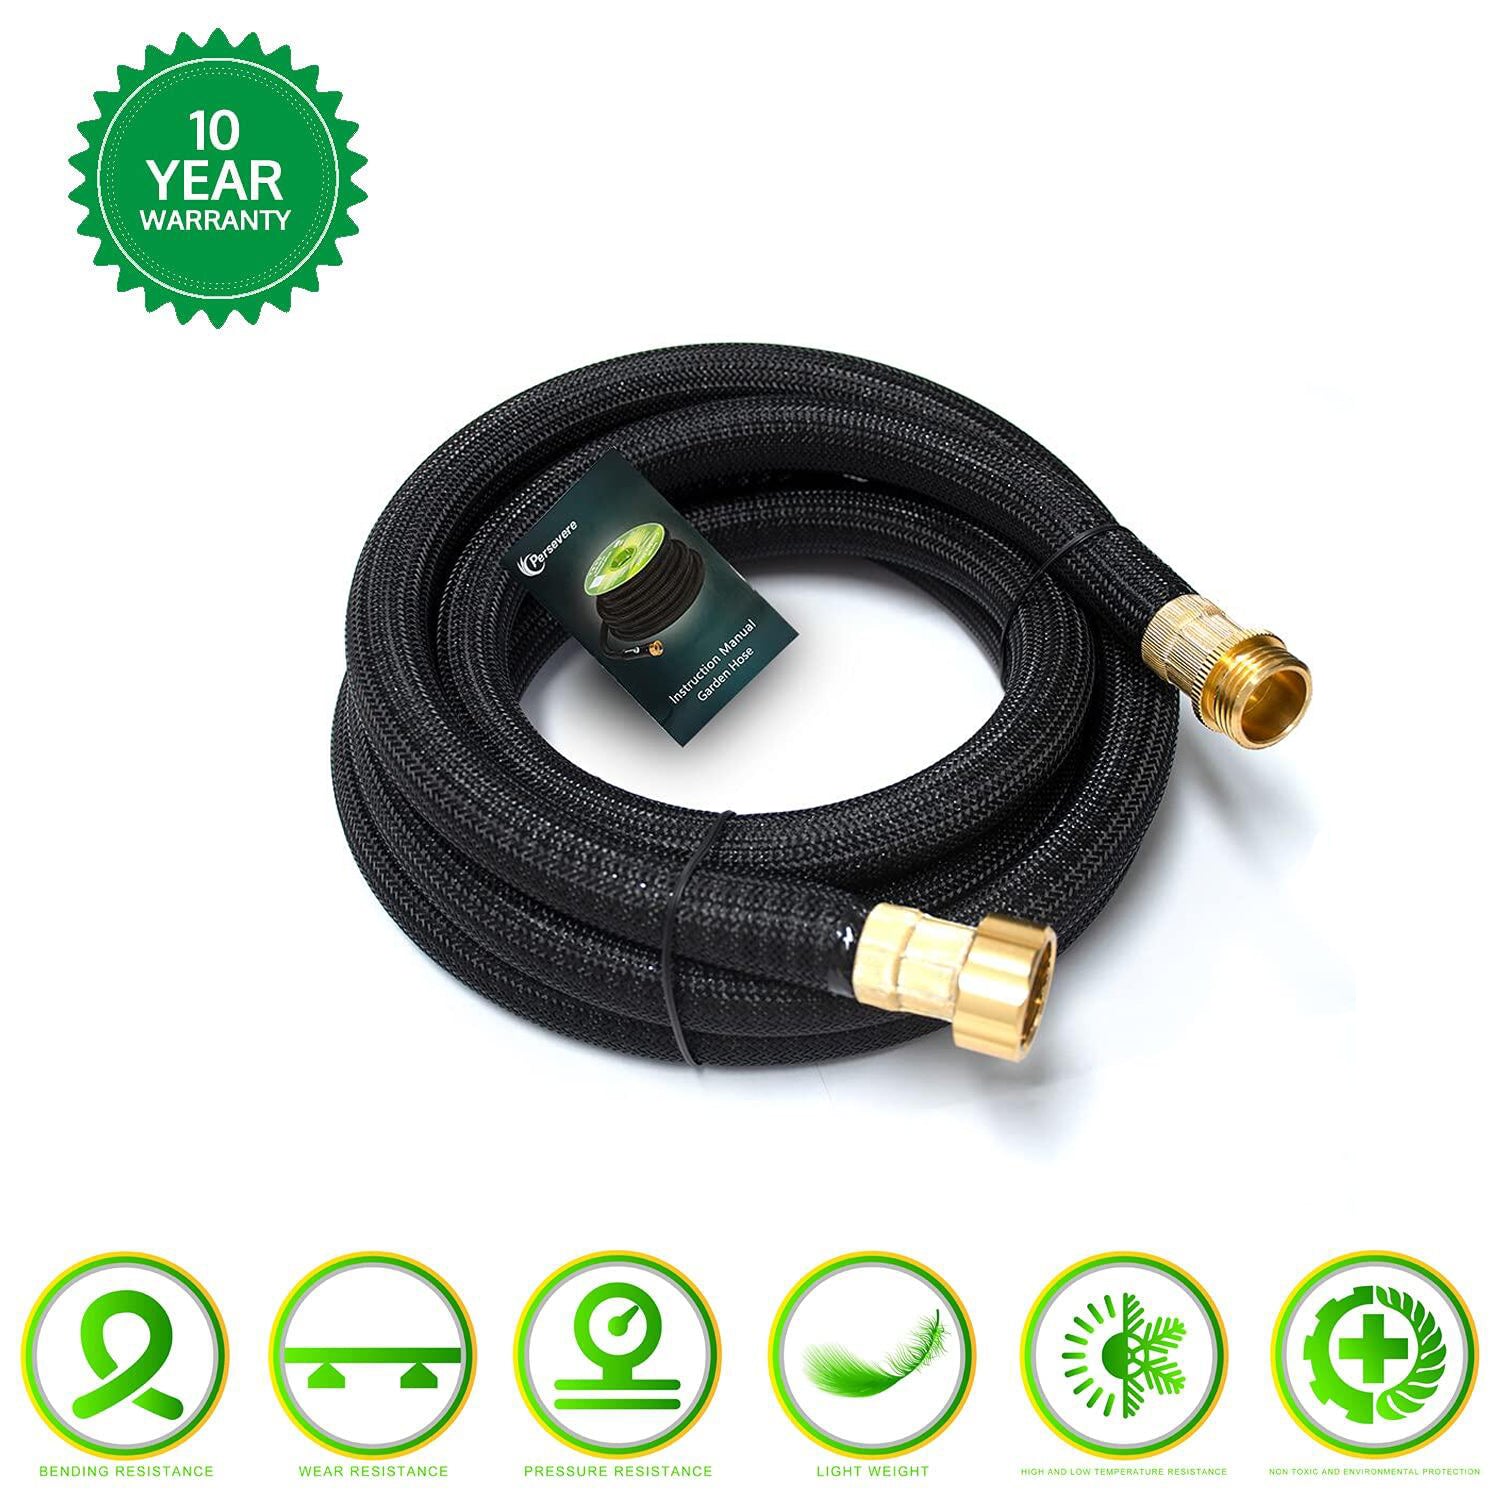 Perservere 3ft/10ft Water Hose Extension Adapter, Garden Hose Connector Hose, Anti-Kink Design with Integrated Spiral Tube,for Hose Reel/RV/Dehumidifier, Durable/Drinking Water Safe